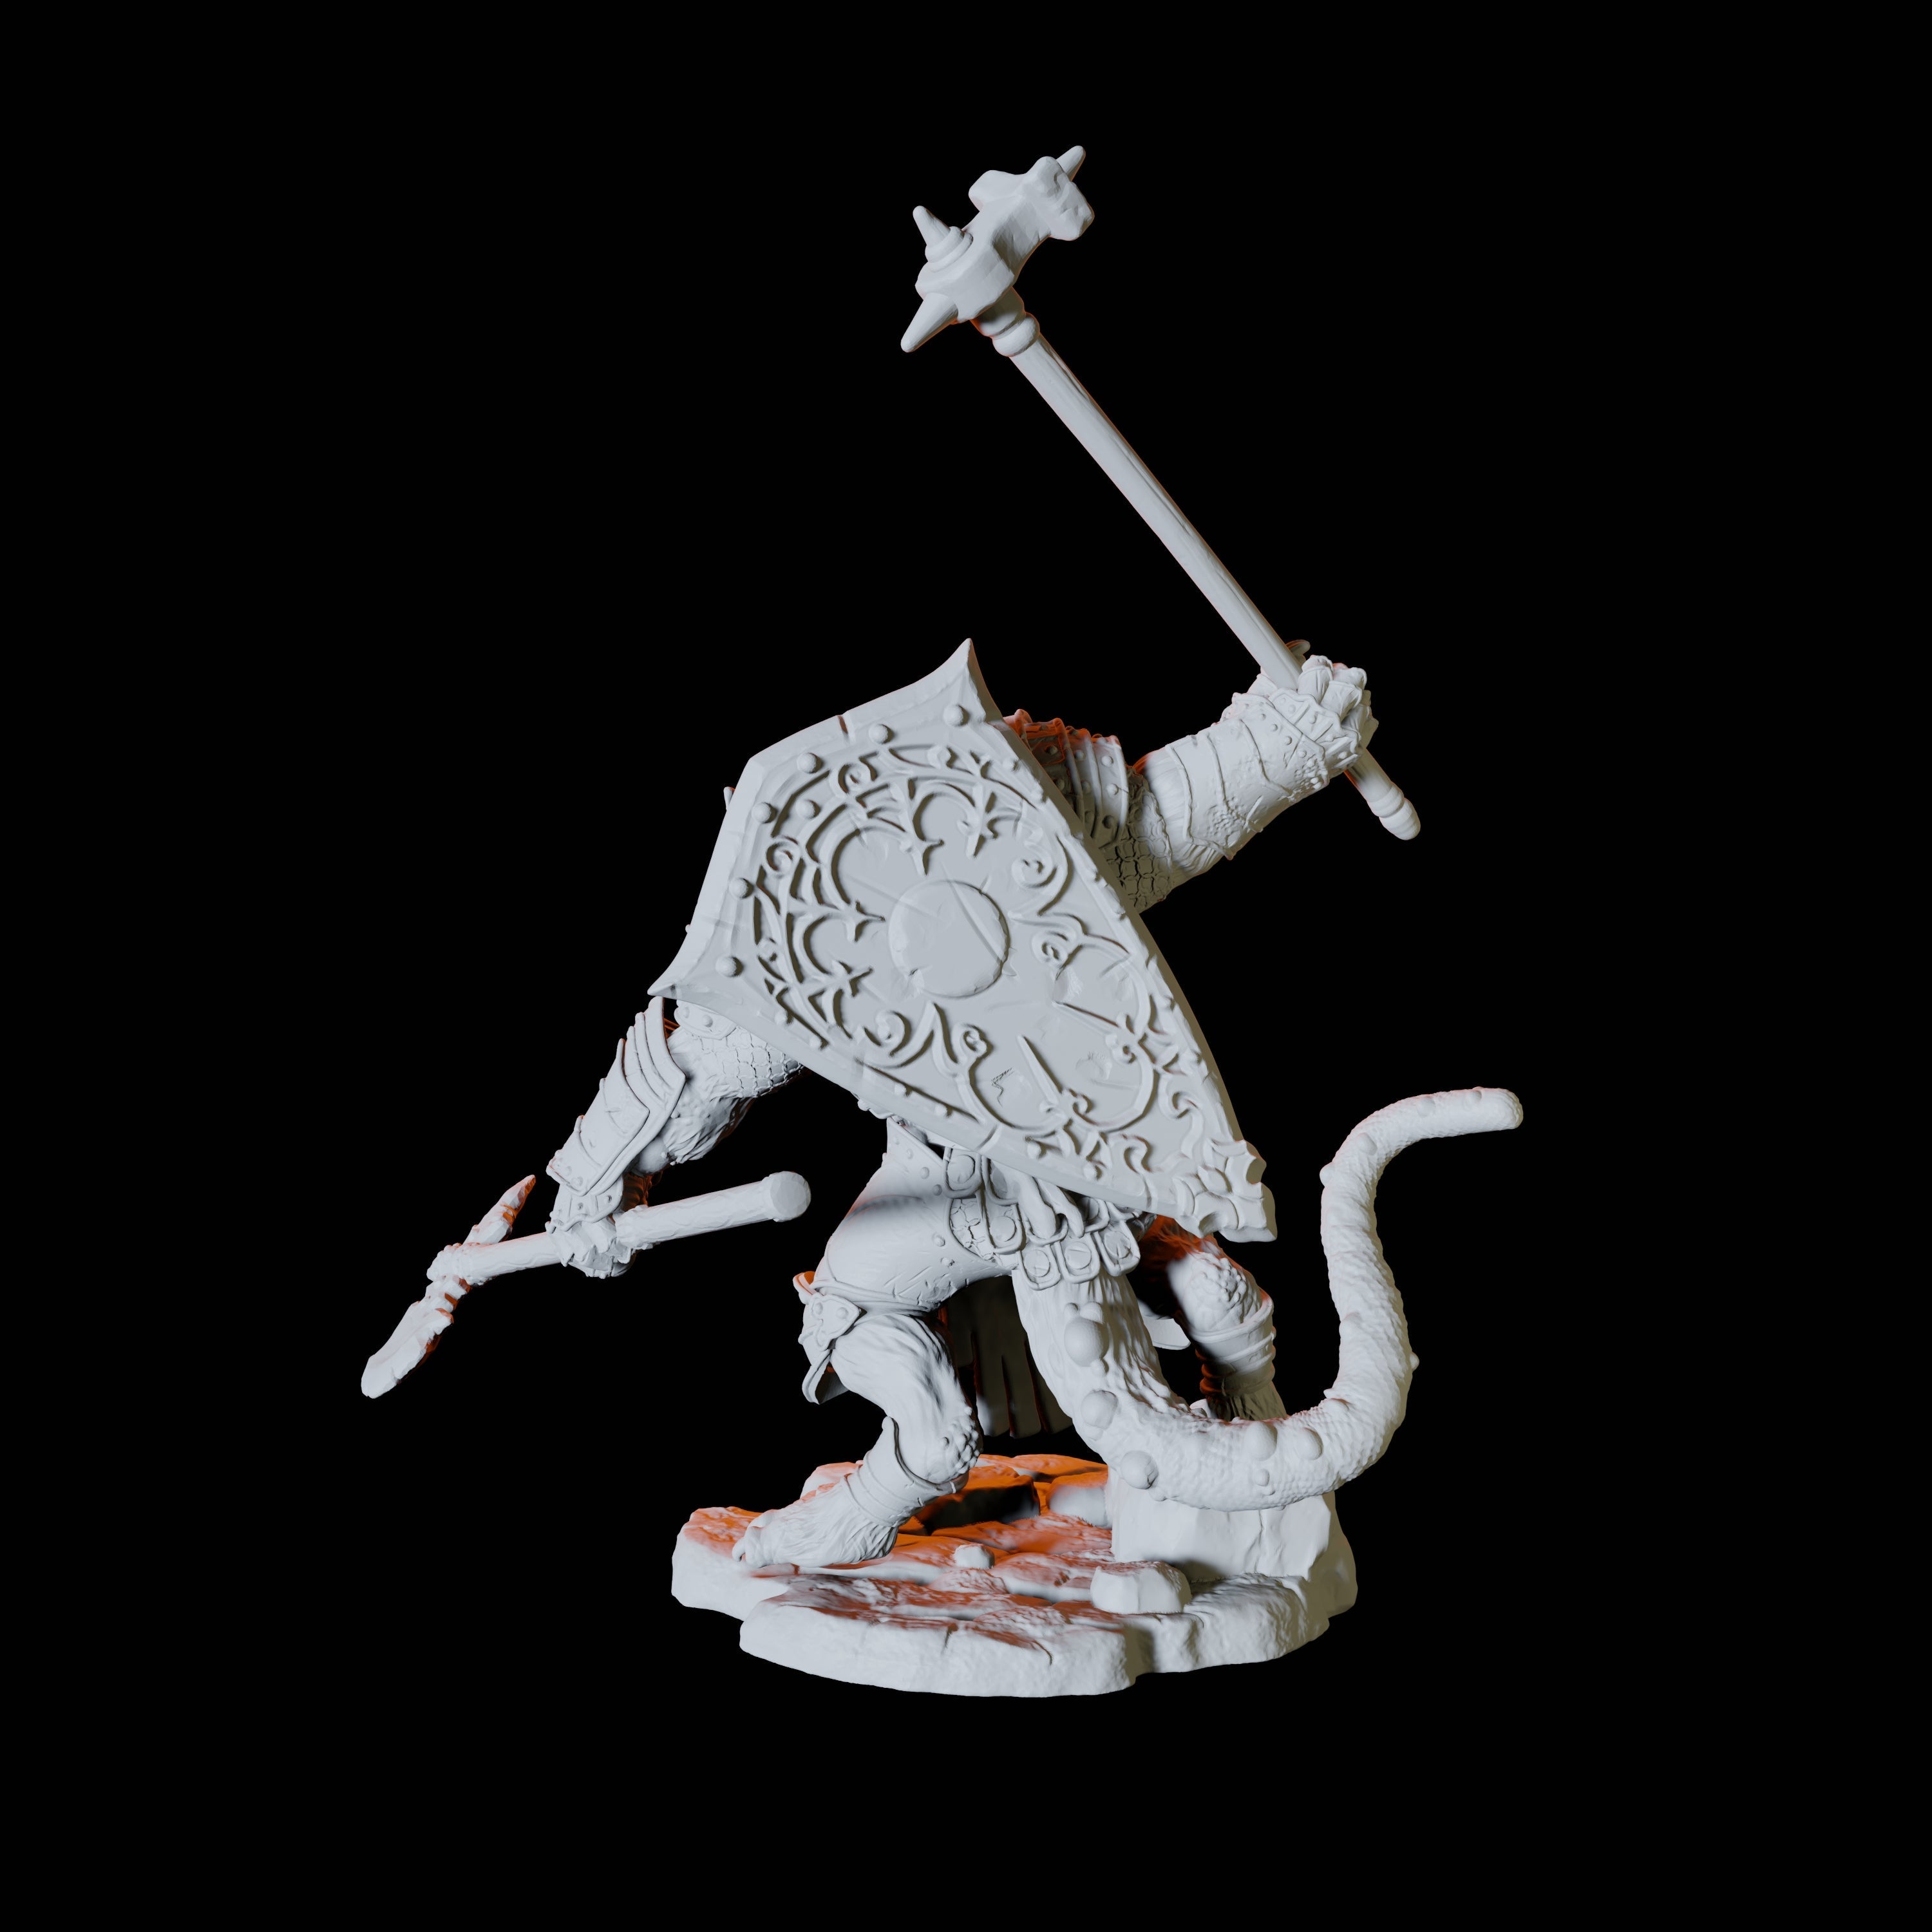 Ratfolk Soldier B Miniature for Dungeons and Dragons, Pathfinder or other TTRPGs